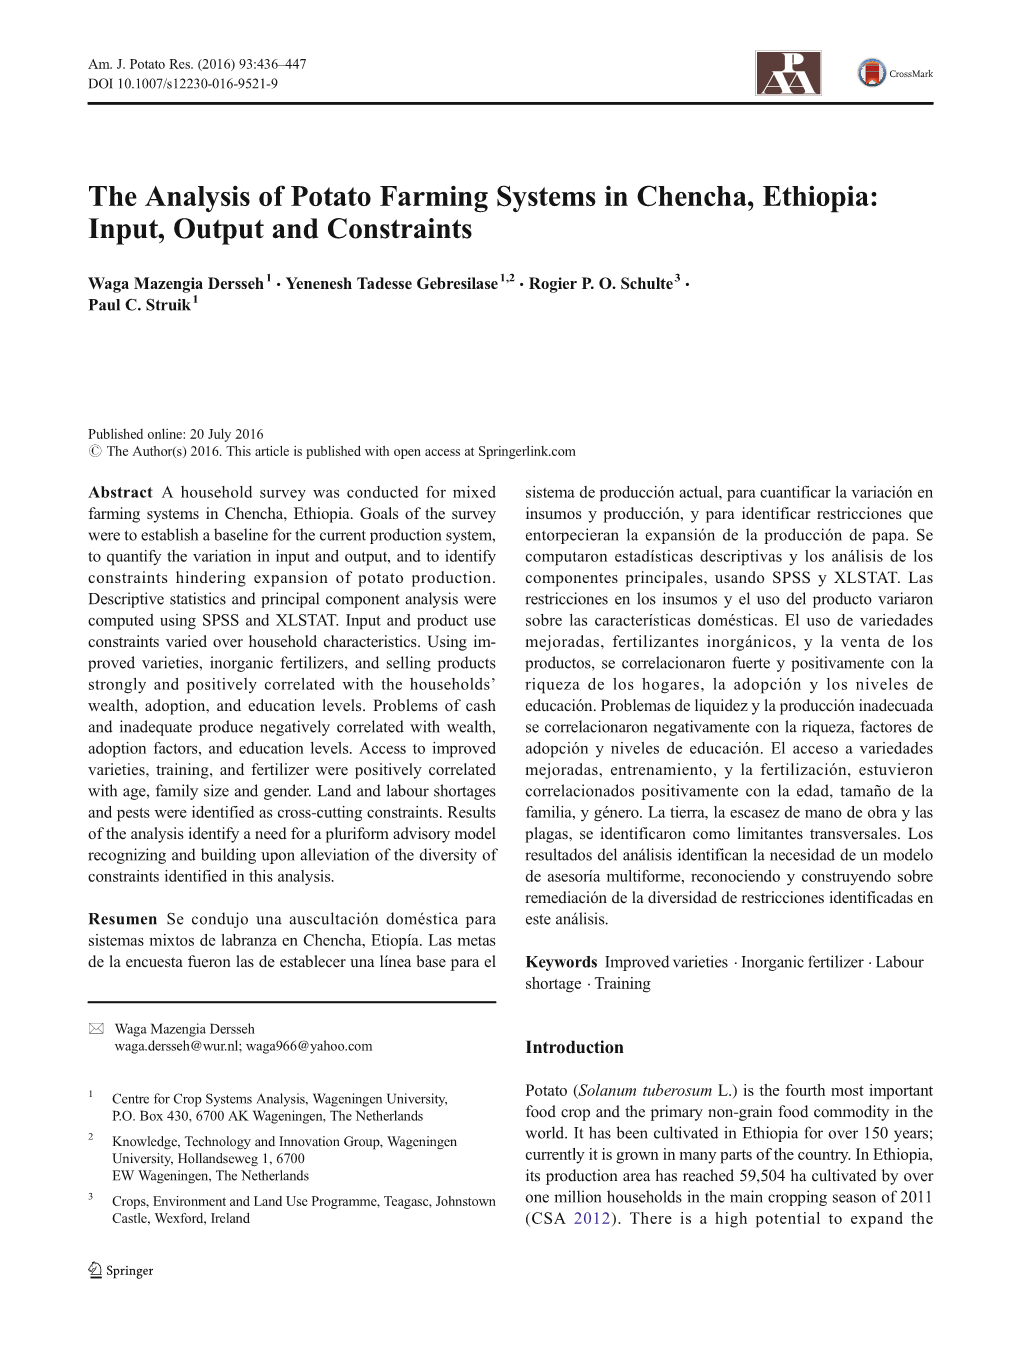 The Analysis of Potato Farming Systems in Chencha, Ethiopia: Input, Output and Constraints